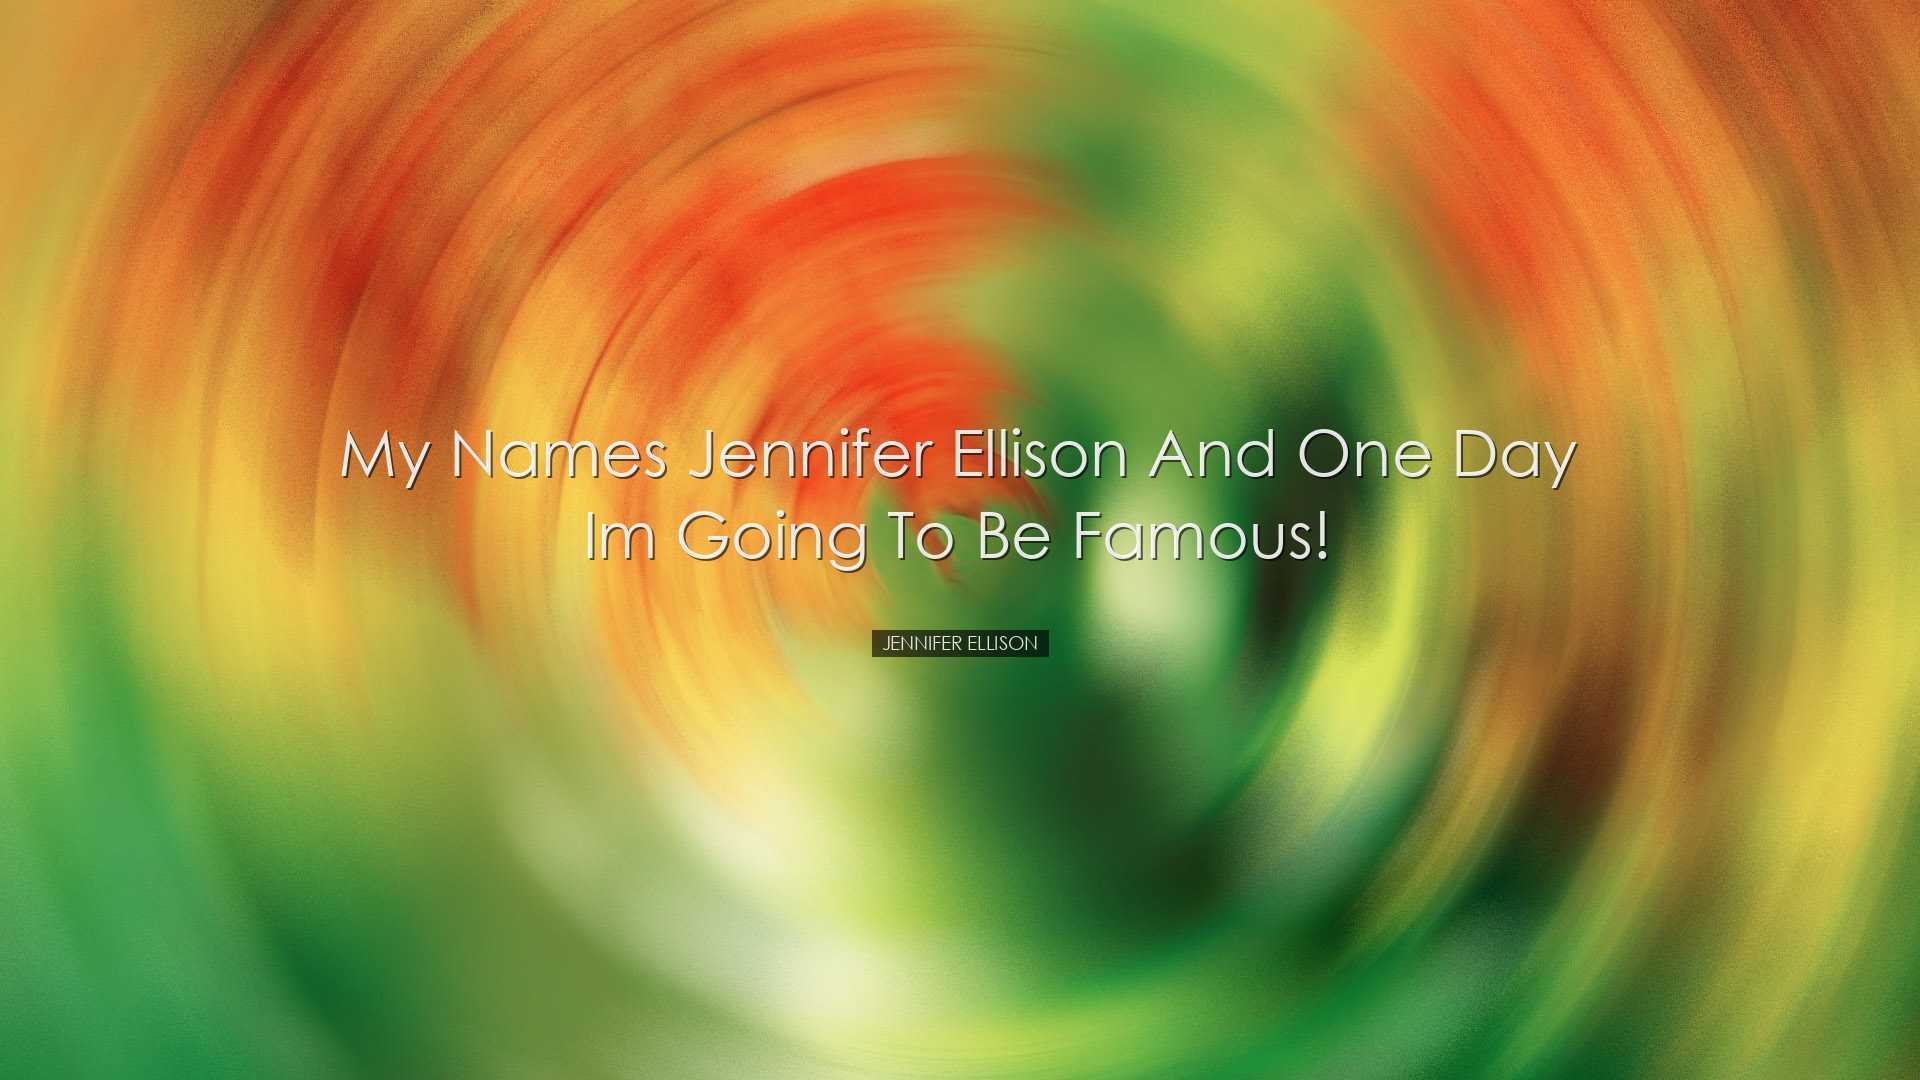 My names Jennifer Ellison and one day Im going to be famous! - Jen